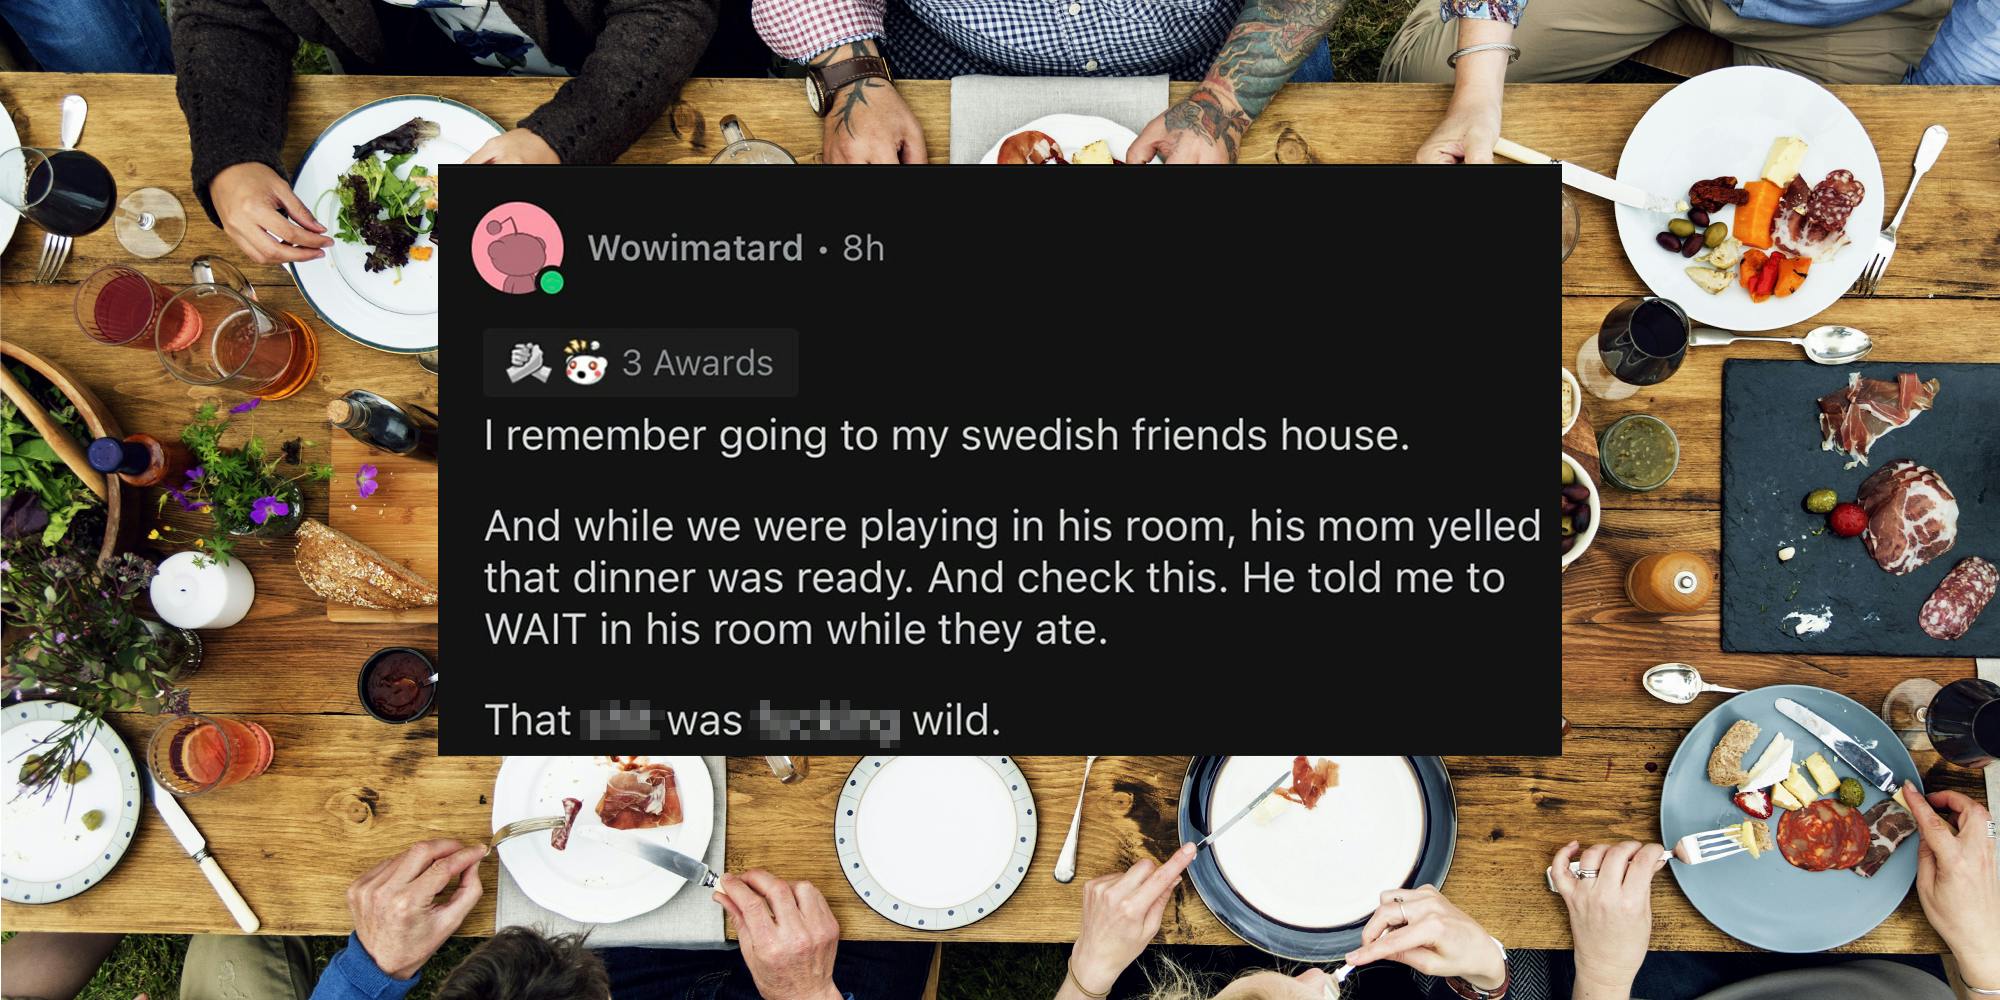 group dinner on wooden table with Reddit post by Wowimatard caption "I remember going to my Swedish friends house. And while we were playing in his room, his mom yelled that dinner was ready. And check this. He told me to WAIT in his room while they ate. That blank was blank wild."